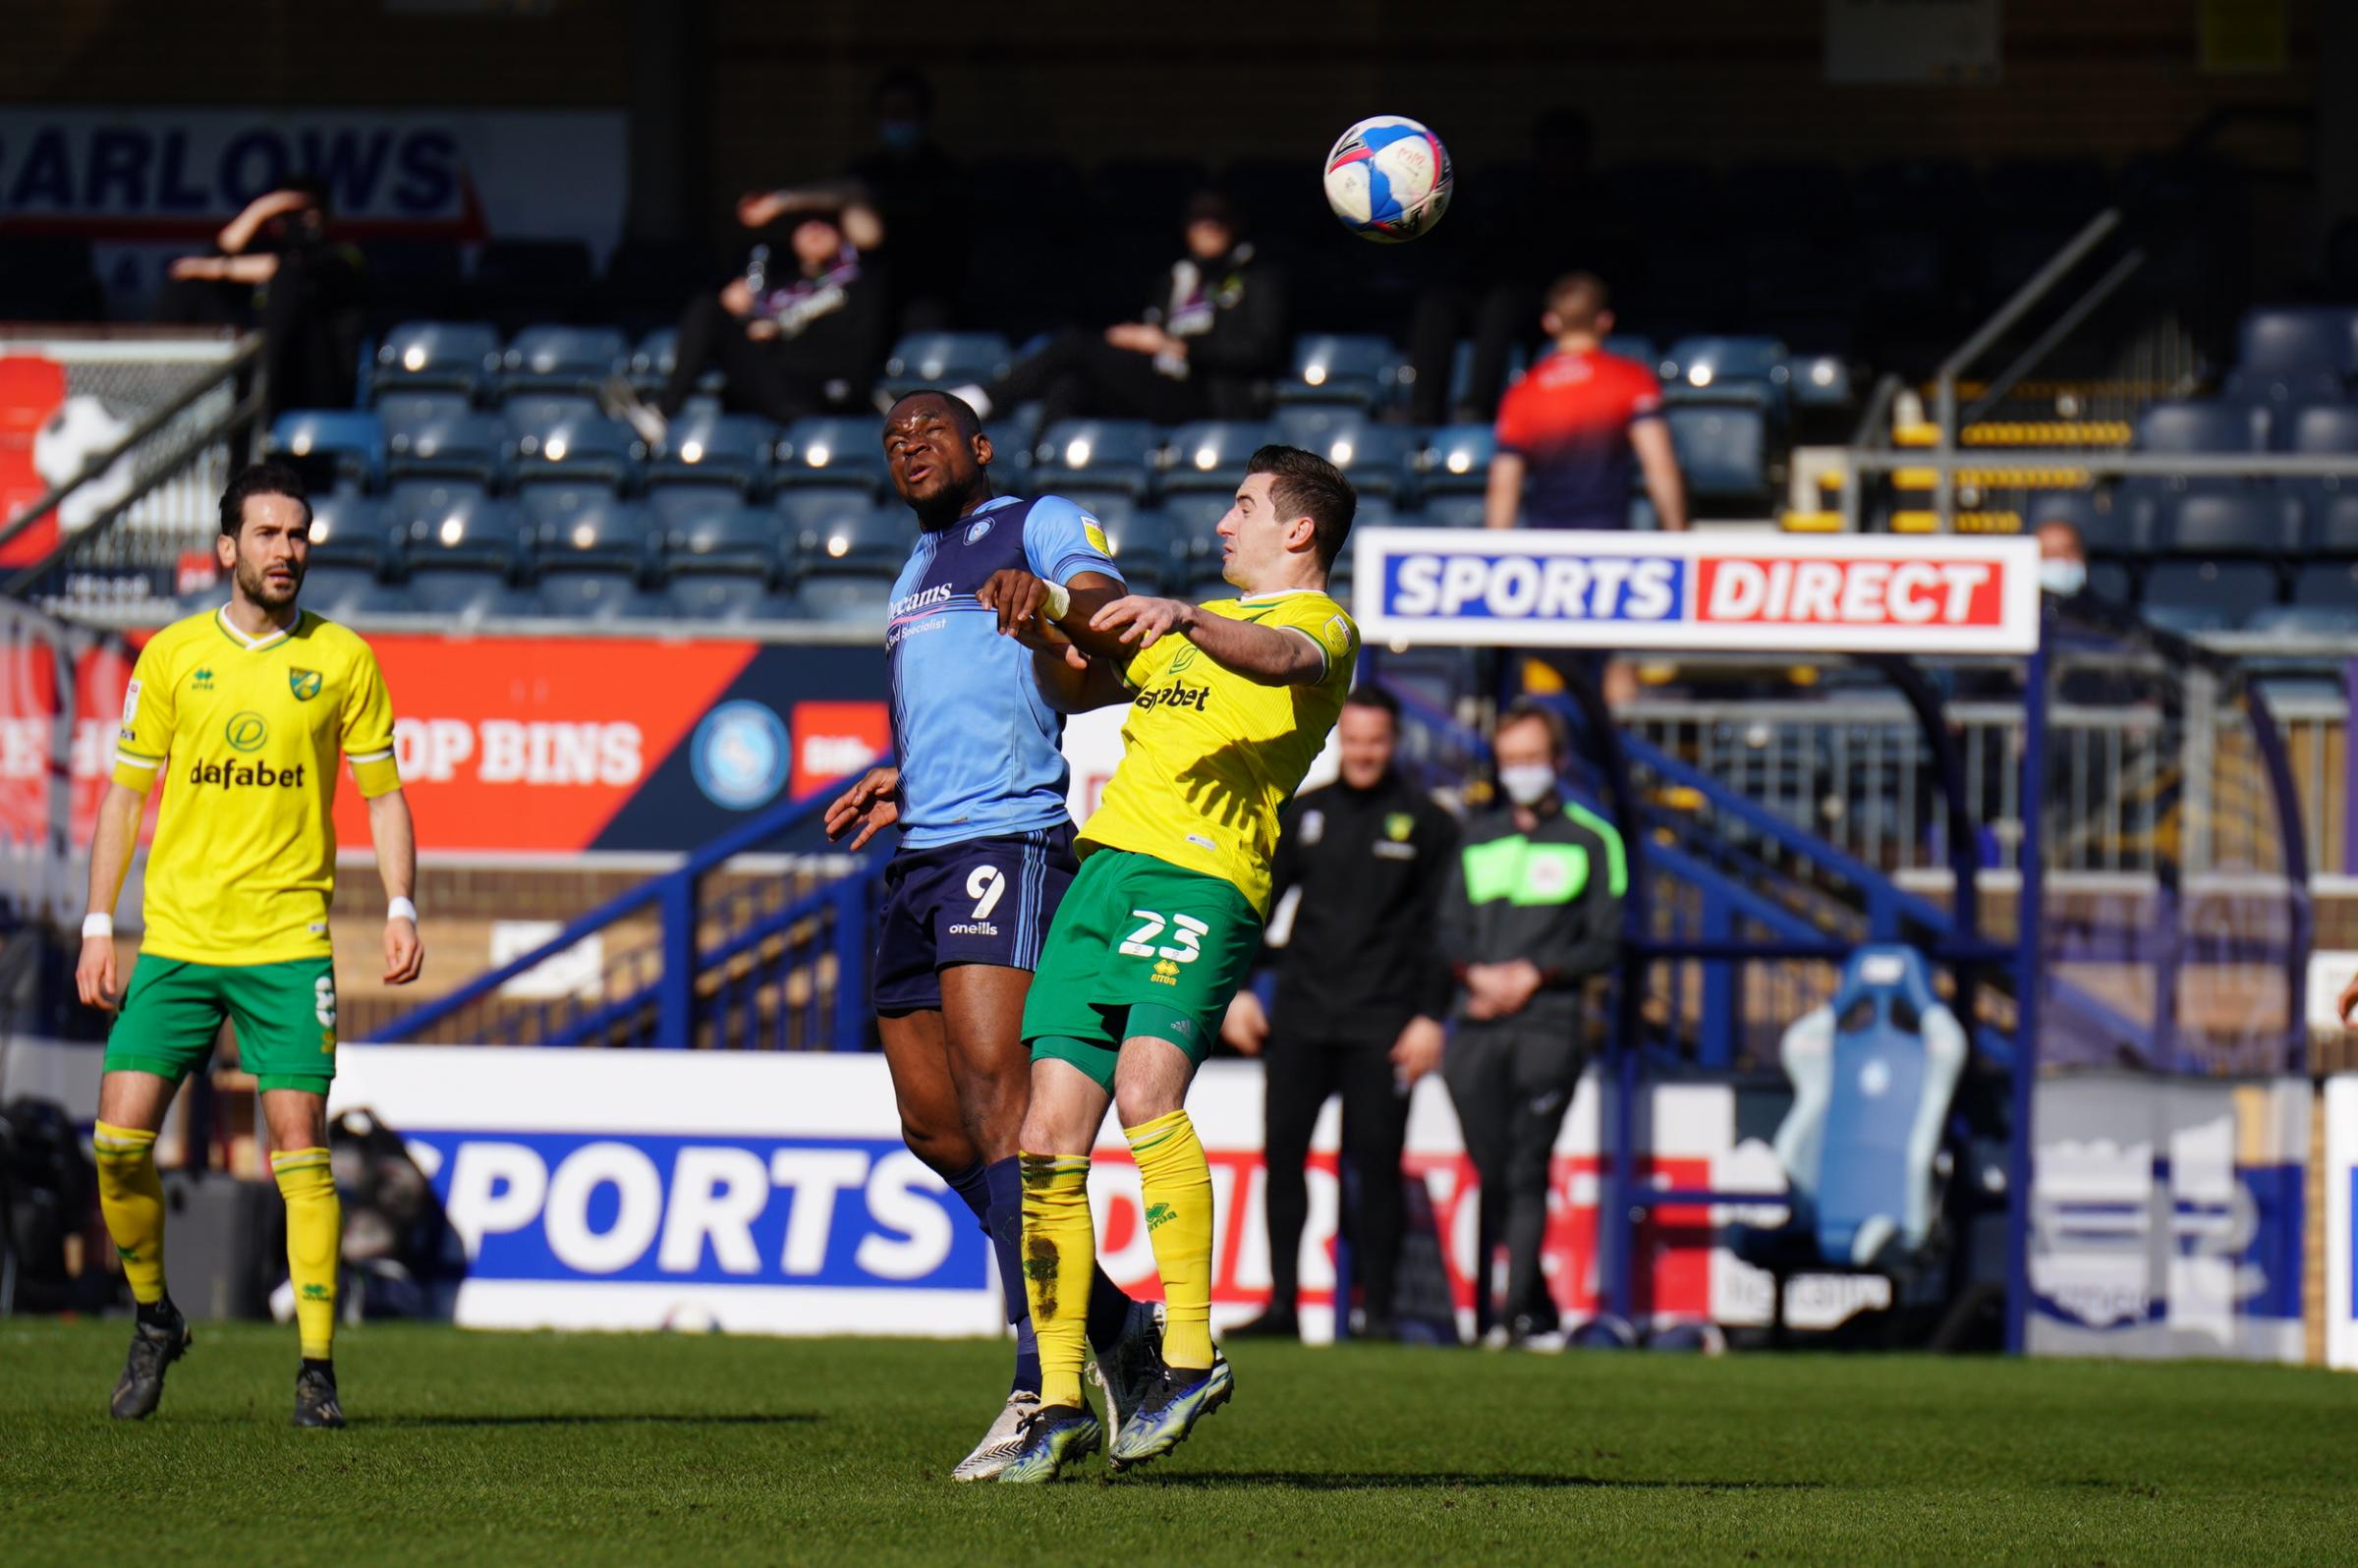 Wycombe lost 2-0 at home to Norwich on Feb 28 (Prime Media)